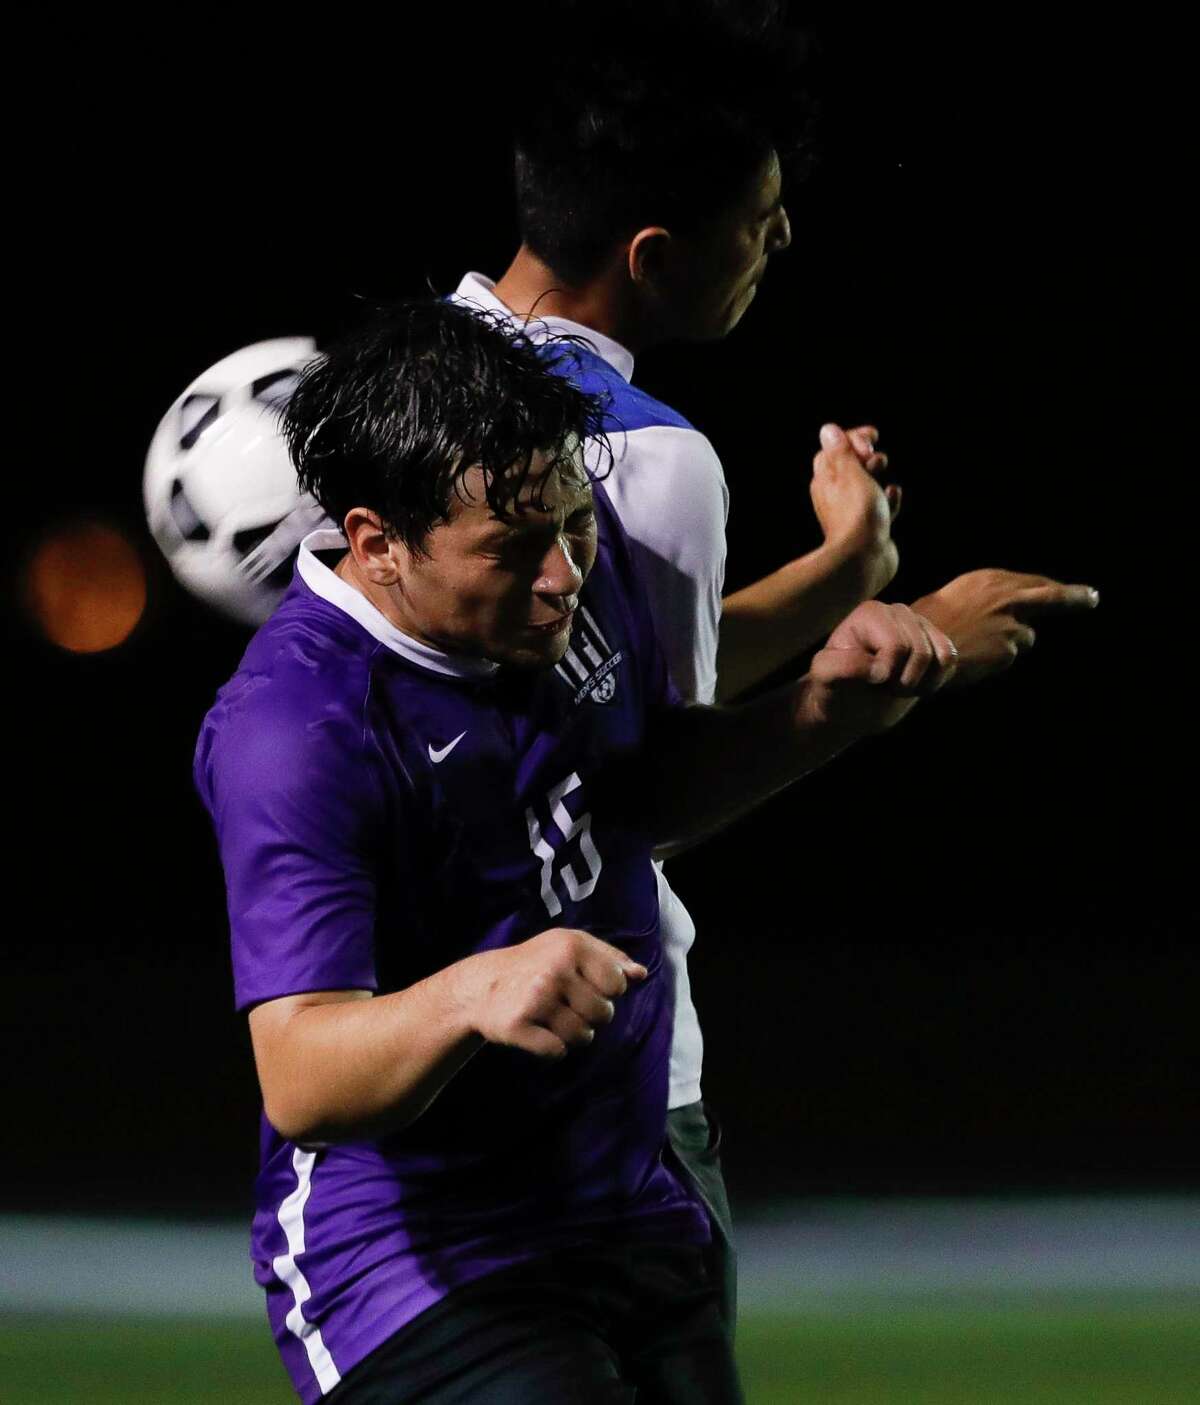 Willis’ Oscar Flores (15) and New Caney’s Alessandro Trevino (2) go for a header during the first period of a District 20-5A high school soccer match at Berton A. Yates Stadium, Tuesday, Jan. 14, 2020, in Willis.